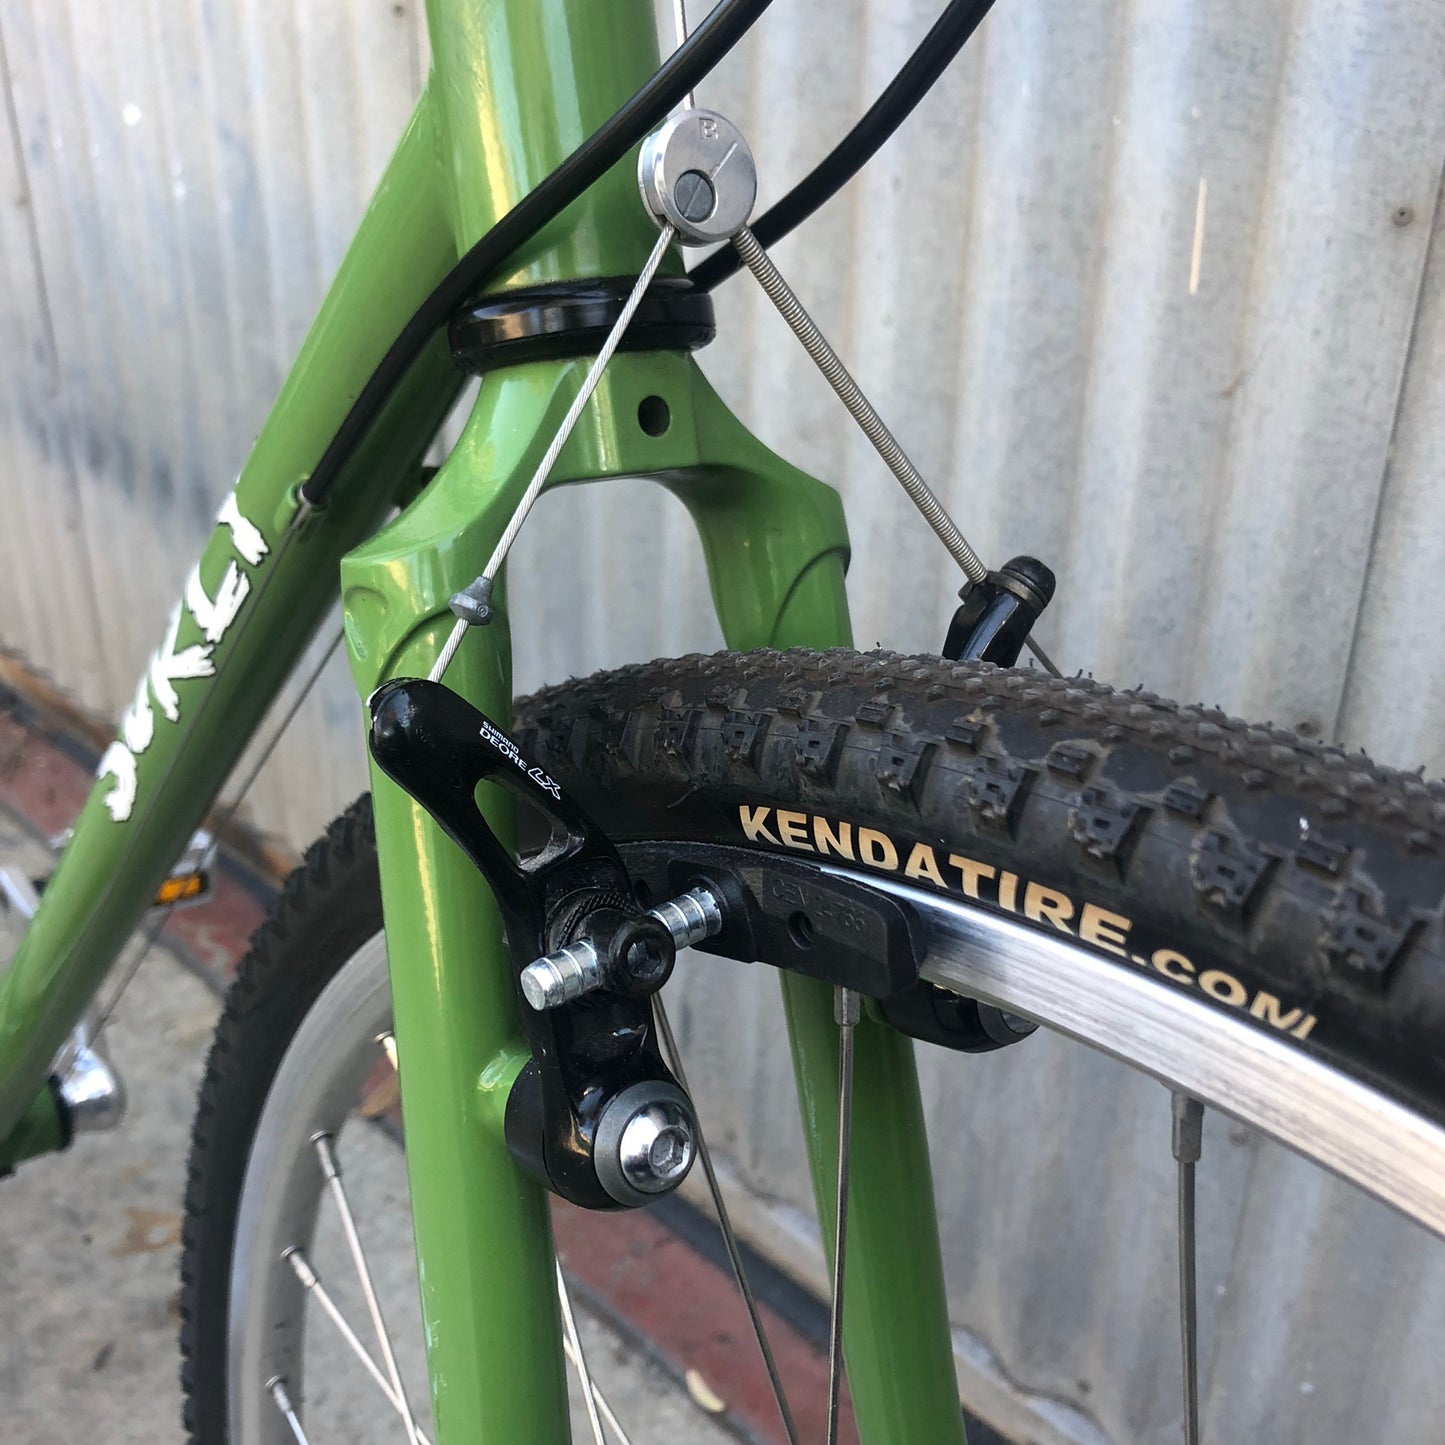 Used Surly Cross Check Set-Up as Cool Upright Gravel Commuter